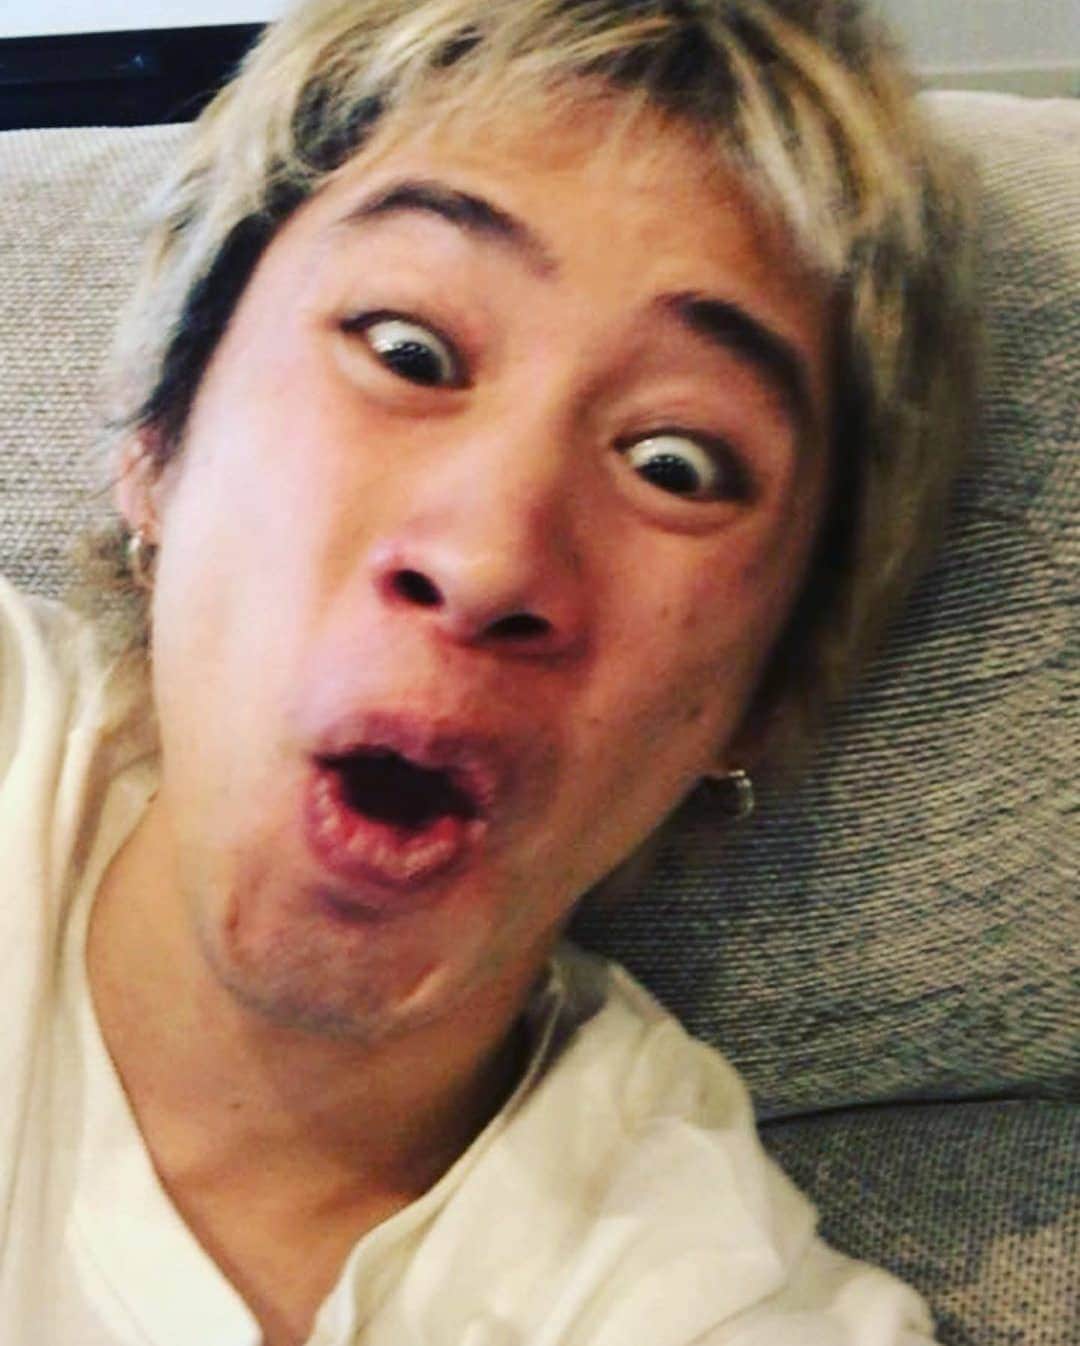 ONE OK ROCK WORLDさんのインスタグラム写真 - (ONE OK ROCK WORLDInstagram)「Greetings from members on Taka's birthday _ @10969taka  Oneokrock マジ最高！ありがとうね！みんな！愛してるよ！😌 @toru_10969 @ryota_0809 @tomo_10969 @oneokrockofficial  Oneokrock Really the best!  Thanks!  Everyone!  I love you! 😌 @ toru_10969 @ ryota_0809 @ tomo_10969 @oneokrockofficial  _ @tomo_10969 久しぶりに全員集合しました😂 楽しかった🤣  たかひろ、おめでとう㊗️🎉☺️ #happybirthday #32  It's been a while since all of us gathered together. 😂 It was fun. 🤣  Happy Birthday Takahiro.㊗️🎉☺️ #happybirthday #32  _ @ryota_0809  森ちゃん誕生日おめでとう！😄🎂 みんなで祝えてよかった！ サプライズ大成功🙆‍♂️ まぁ...昨日の夜3人で練習したのに最初からミスったけど...楽しかったからOK😁笑  mori-chan, happy birthday! 😄🎂 I'm glad to celebrate it with everyone.  The surprise was a success! 🙆‍♂️ Well, even though the 3 of us practiced yesterday, we made a lot of mistake in the beginning but, it's fine because we all had fun.😁 lol  #oneokrockofficial #10969taka #toru_10969 #tomo_10969 #ryota_0809 #fueledbyramen #eyeofthestorm」4月19日 17時13分 - oneokrockworld